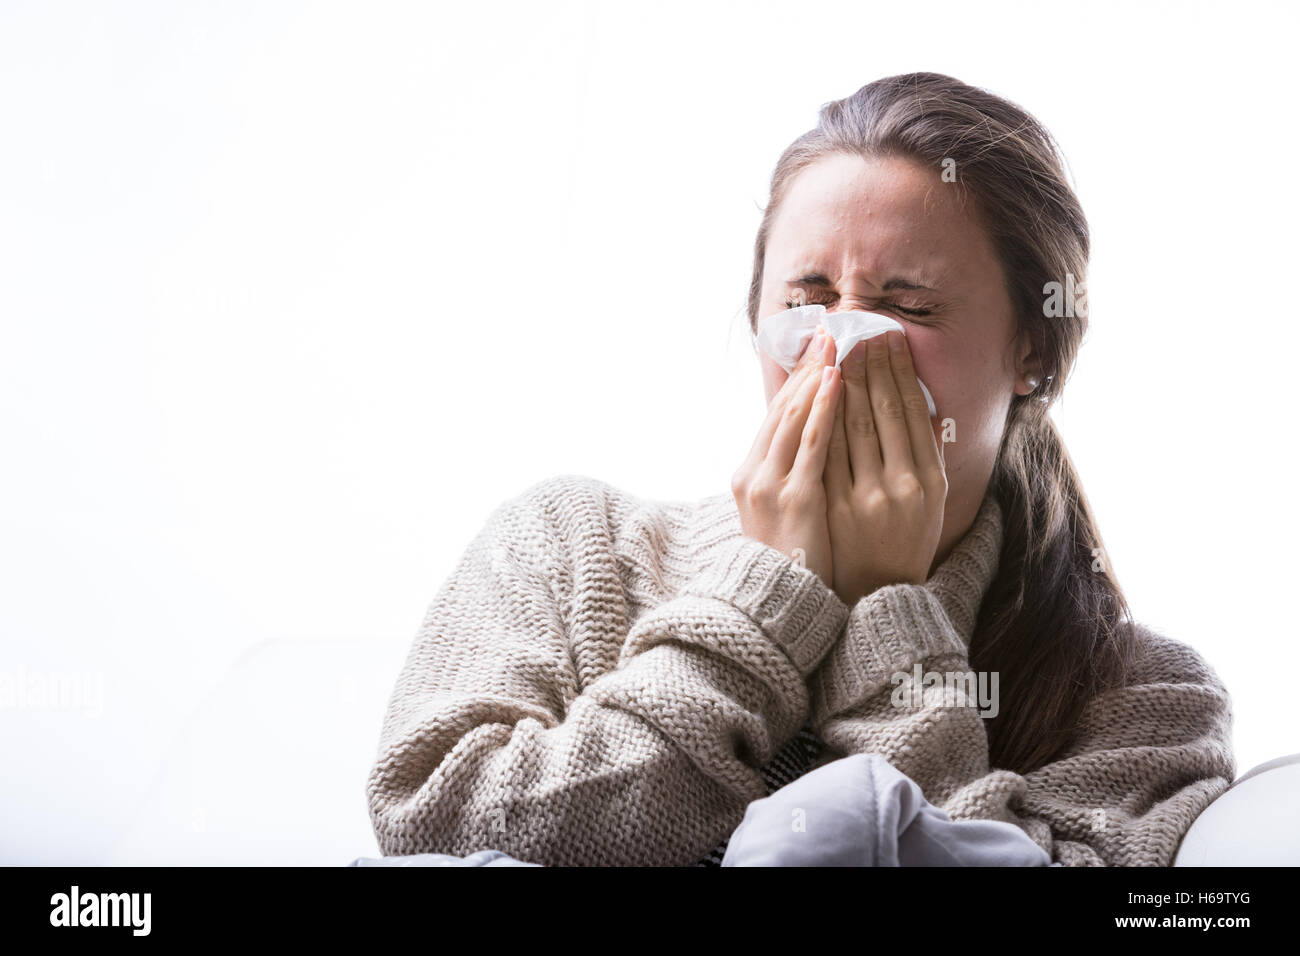 woman blowing her nose because of a cold or a strong allergy or intolerance Stock Photo